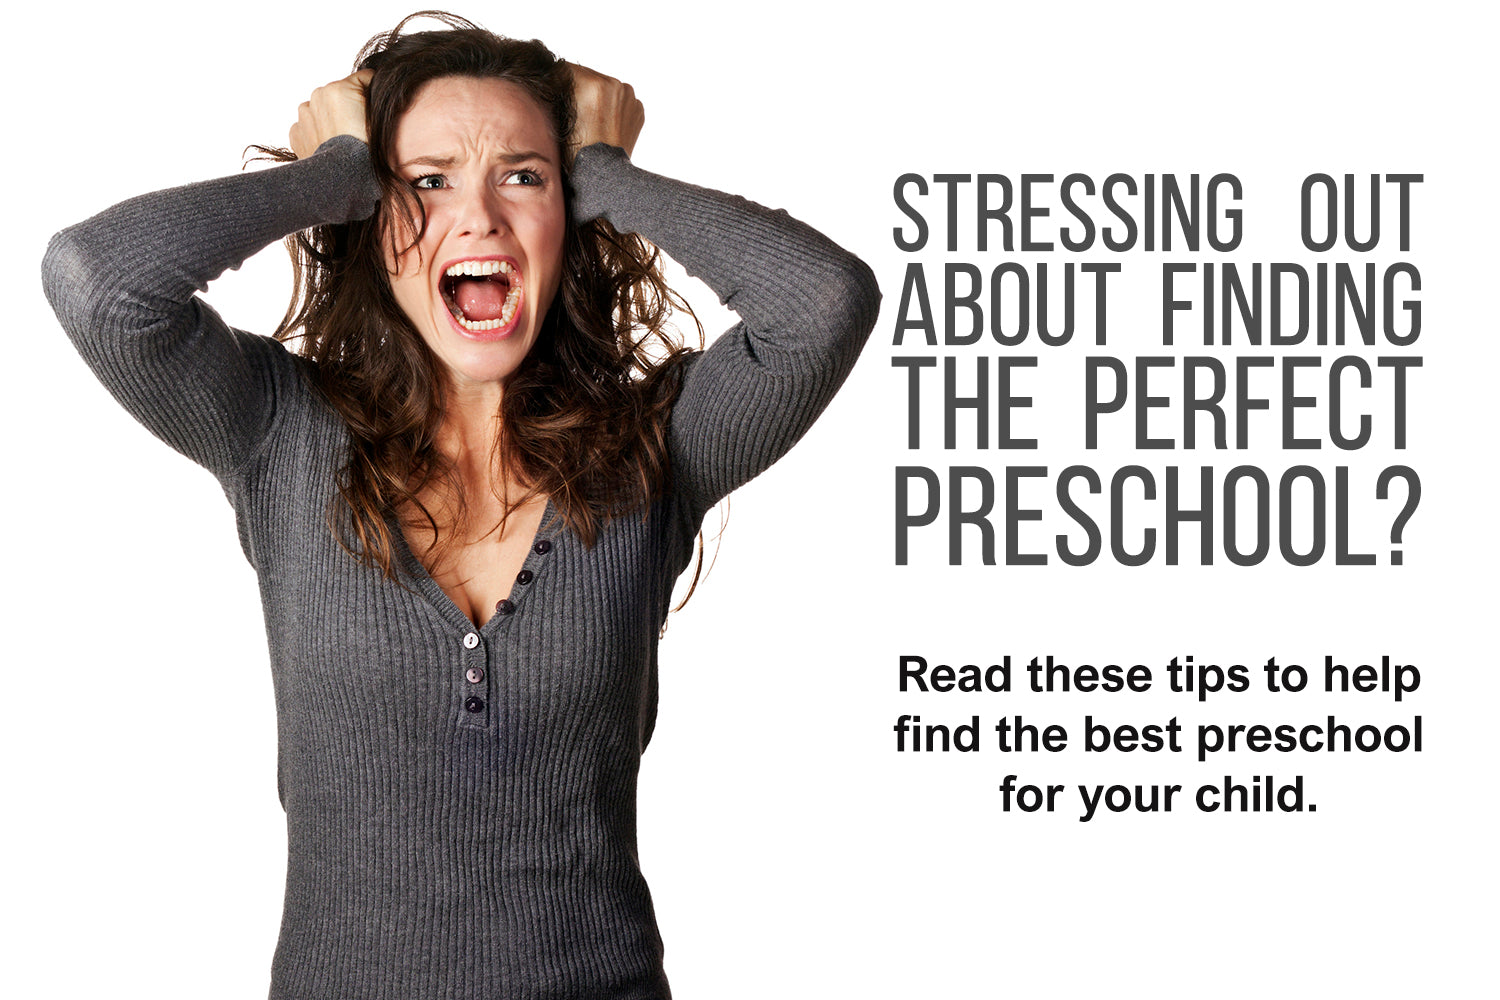 Finding the right preschool for your child